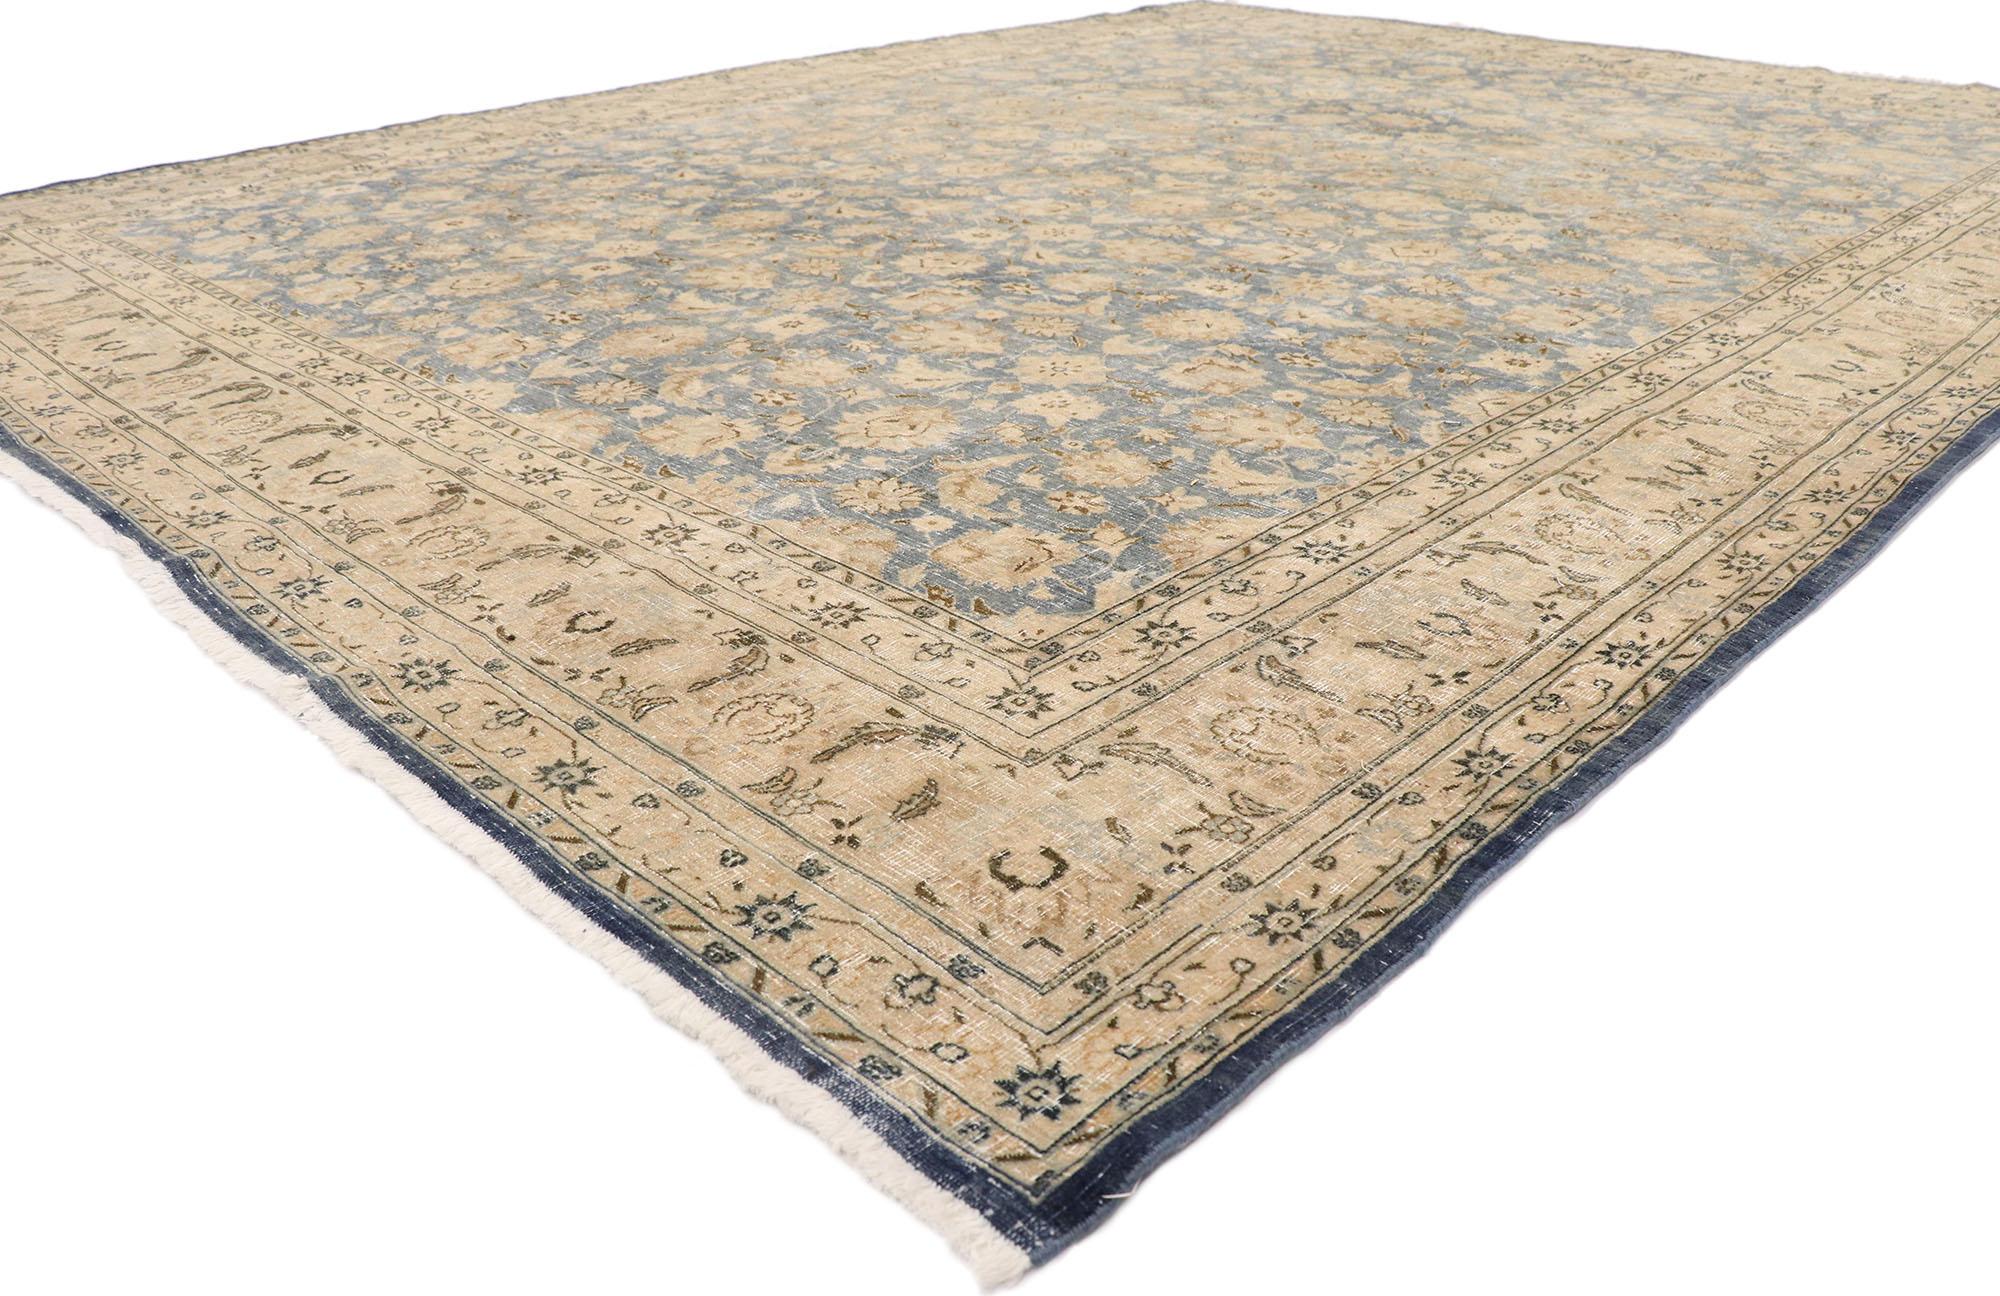 ?60973 Distressed Vintage Persian rug with Rustic Coastal style 09'09 x 12'07. ??Understated elegance combined with cool blue hues and warm taupe tones, this hand-knotted wool vintage Persian rug is poised to impress. The antique washed field